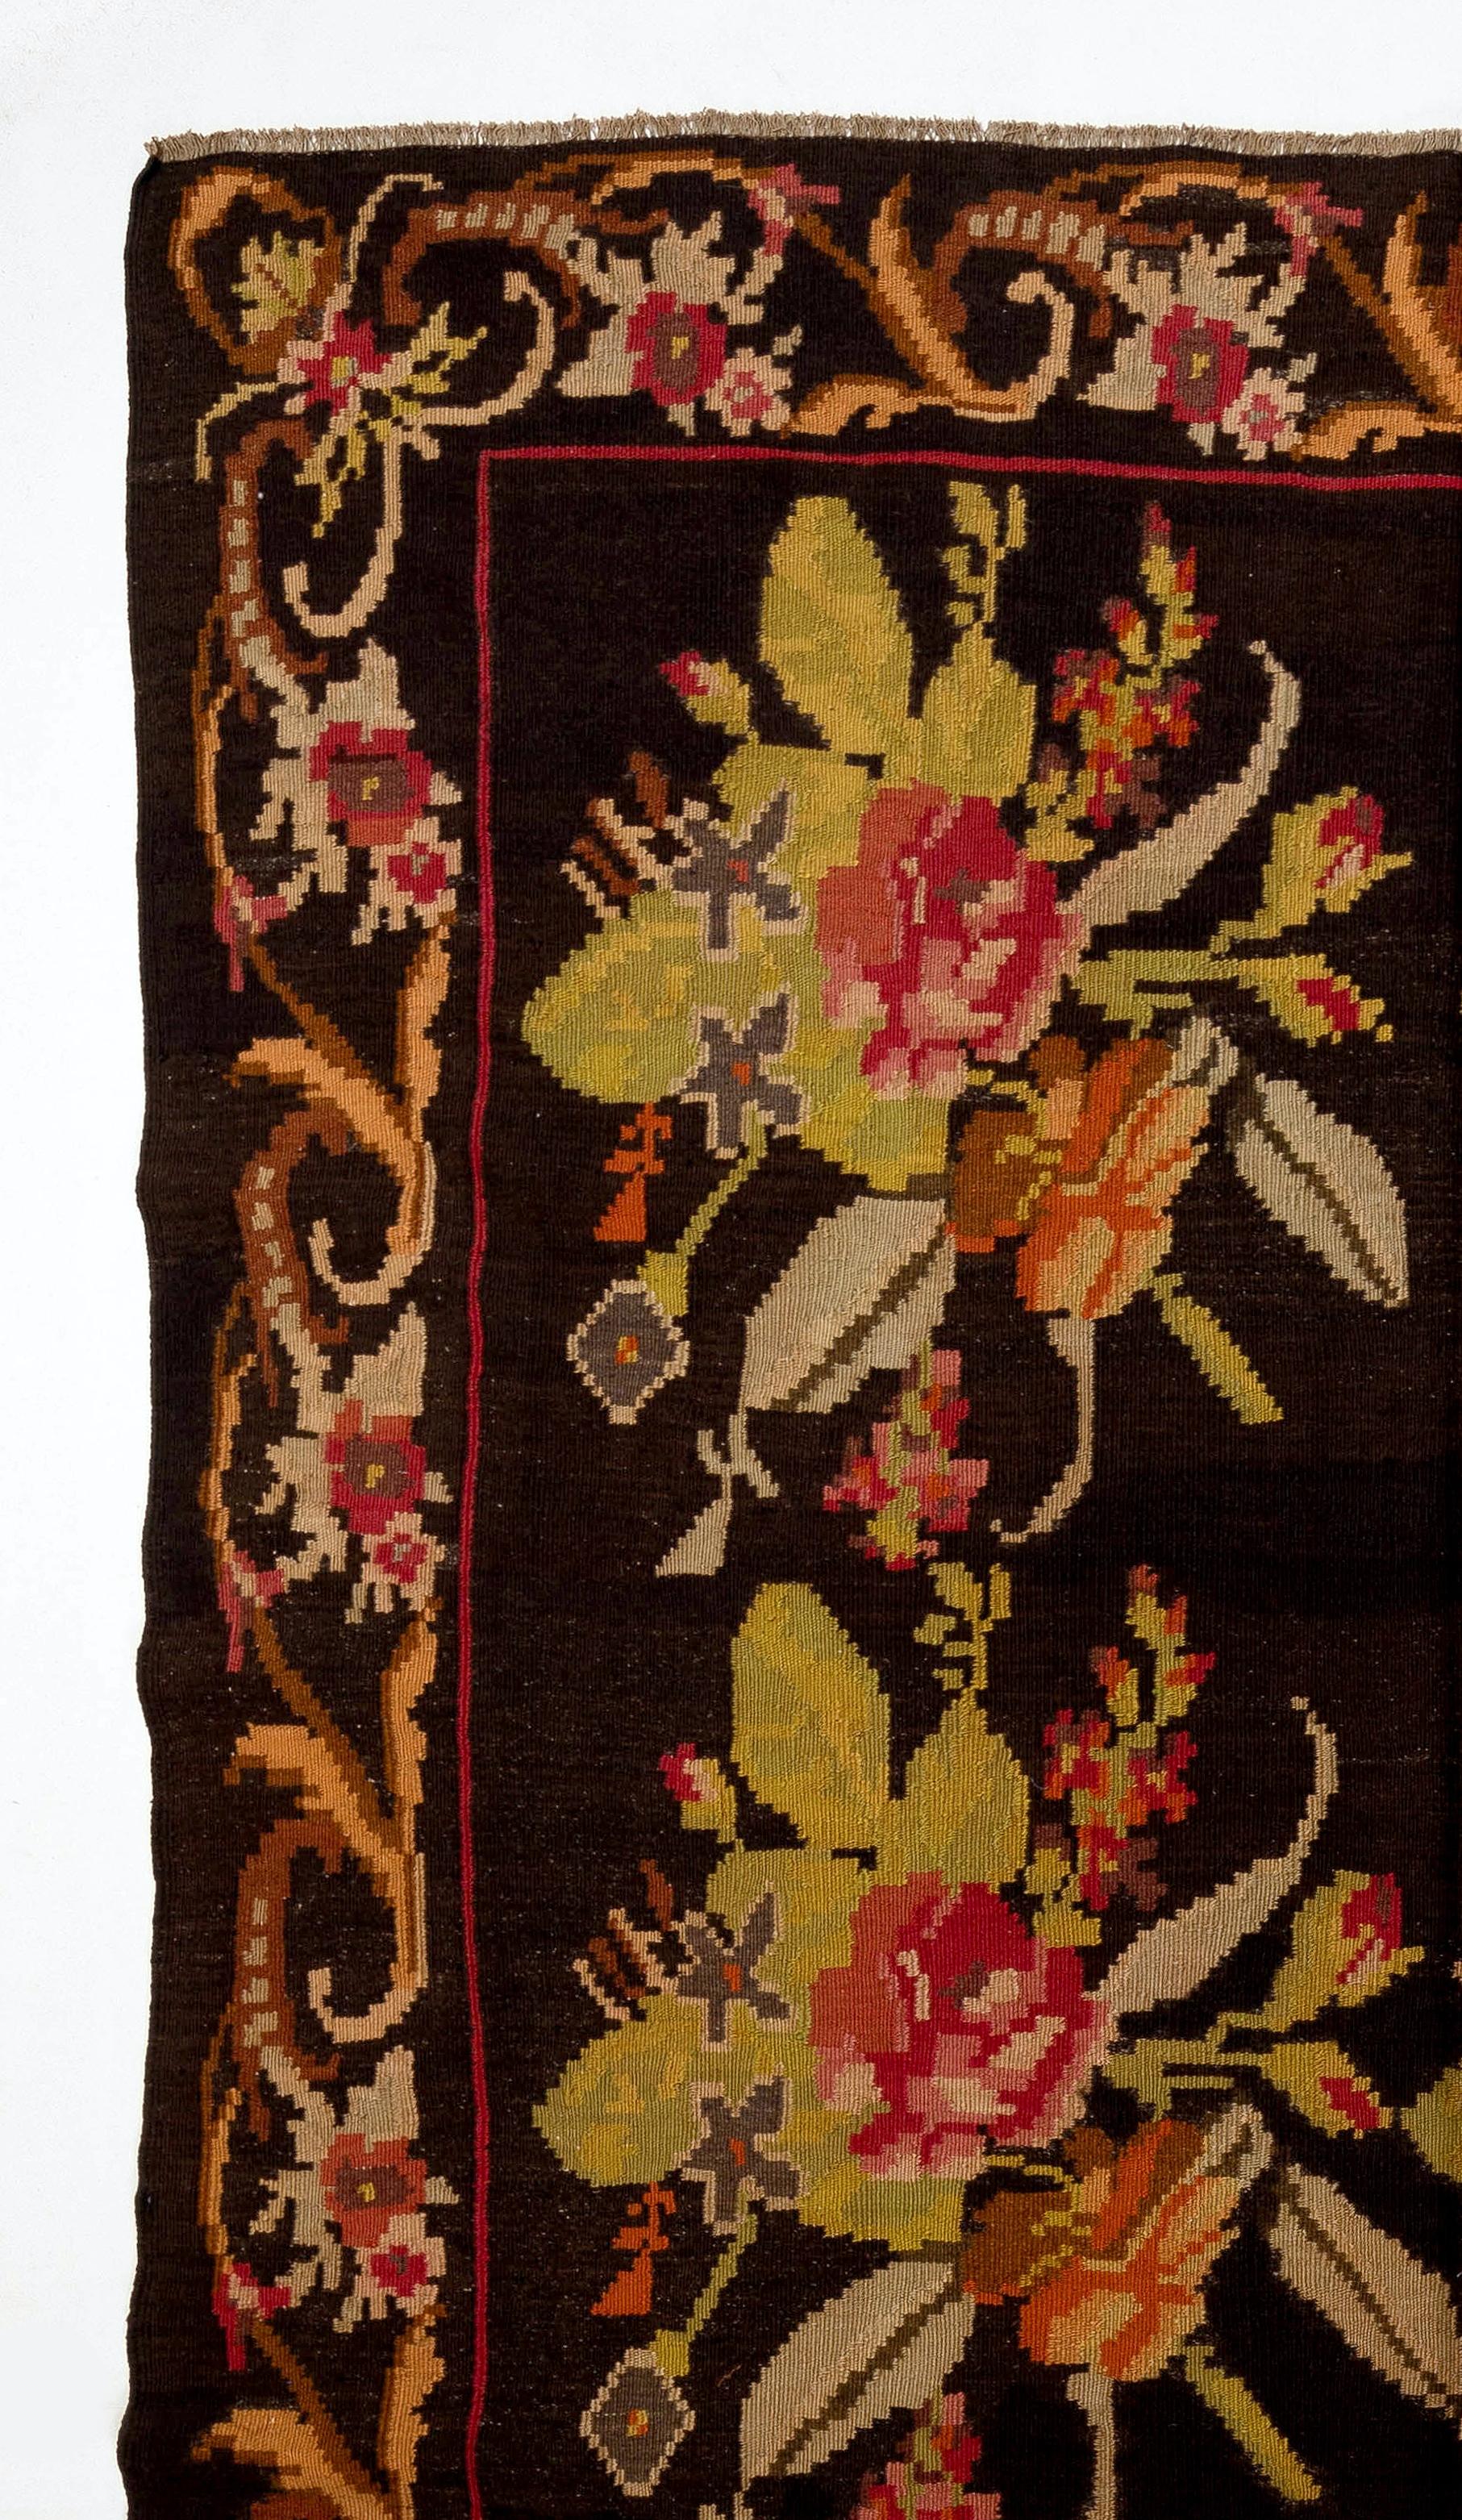 One of a kind vintage Bessarabian Kilim. Size: 6.7x11.8 ft
A handwoven Eastern European rug from Moldova. These traditional Moldovan flat-weaves are inspired from vintage Aubusson carpets but they are distinguished with their black grounds, large